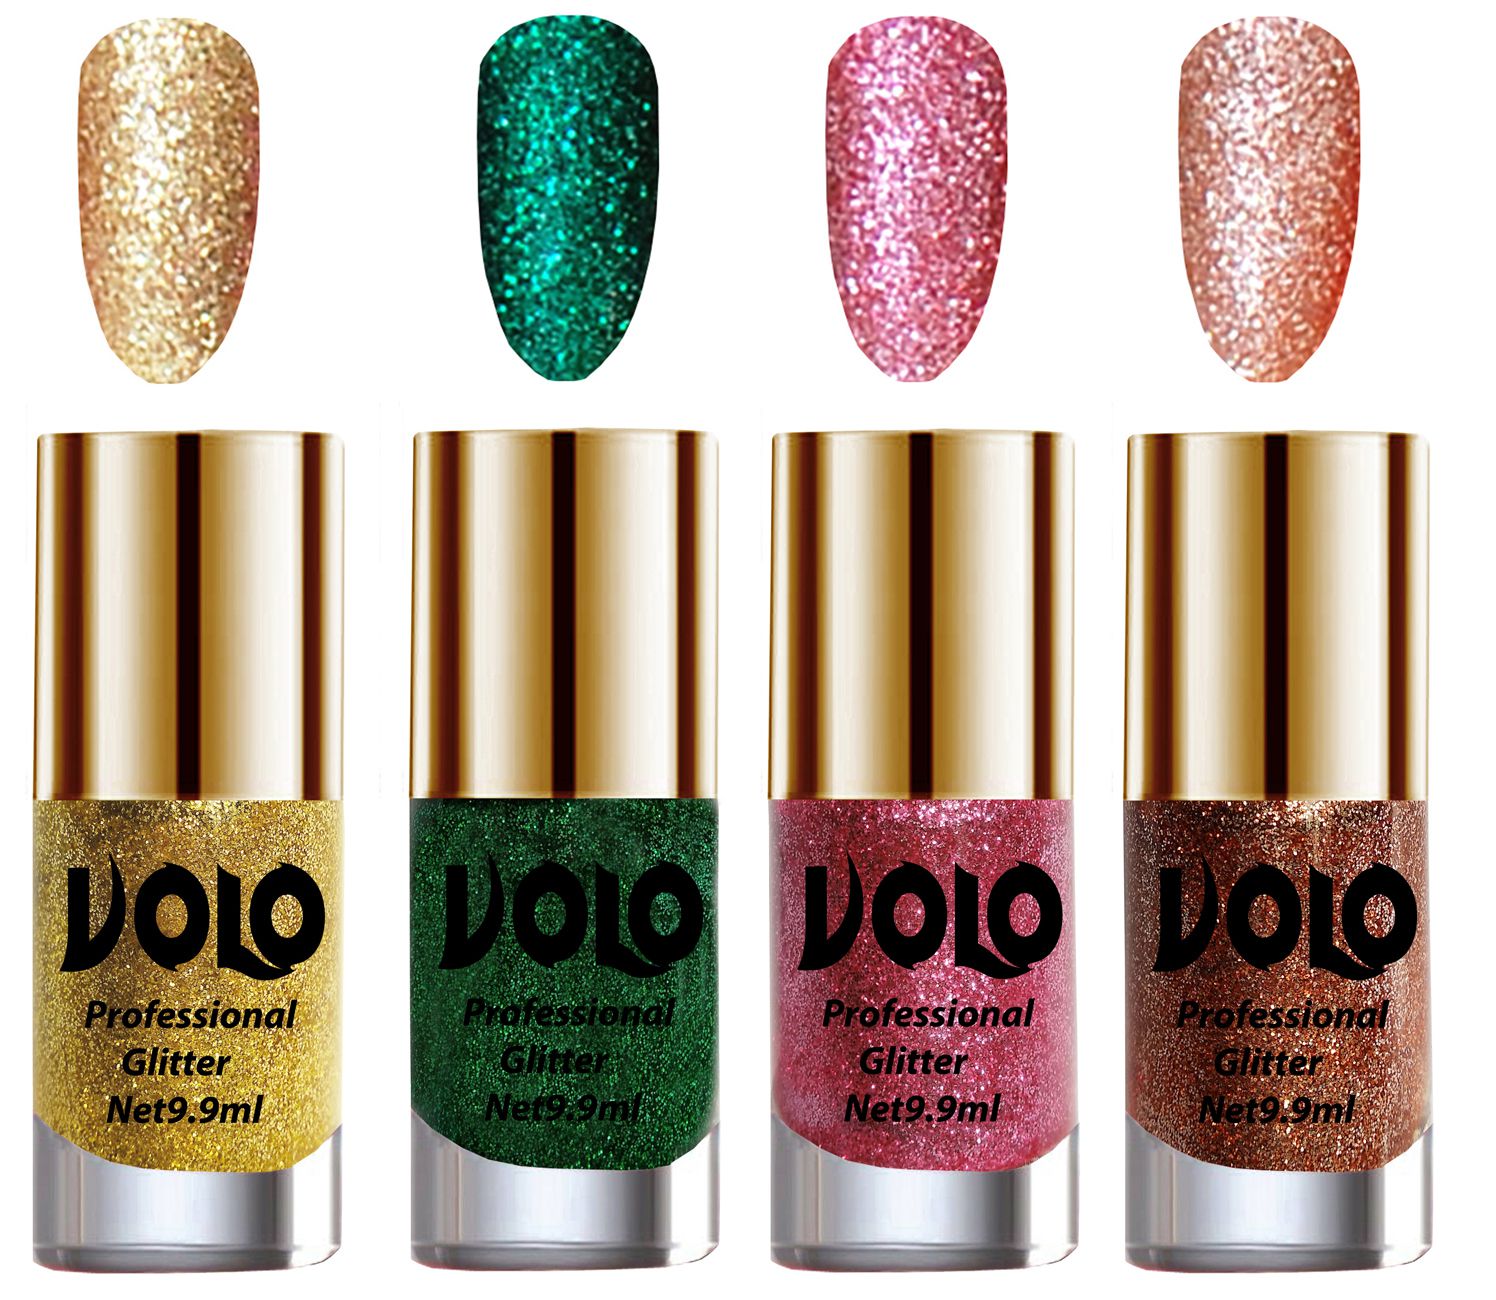     			VOLO Professionally Used Glitter Shine Nail Polish Gold,Green,Pink Red Pack of 4 39 mL